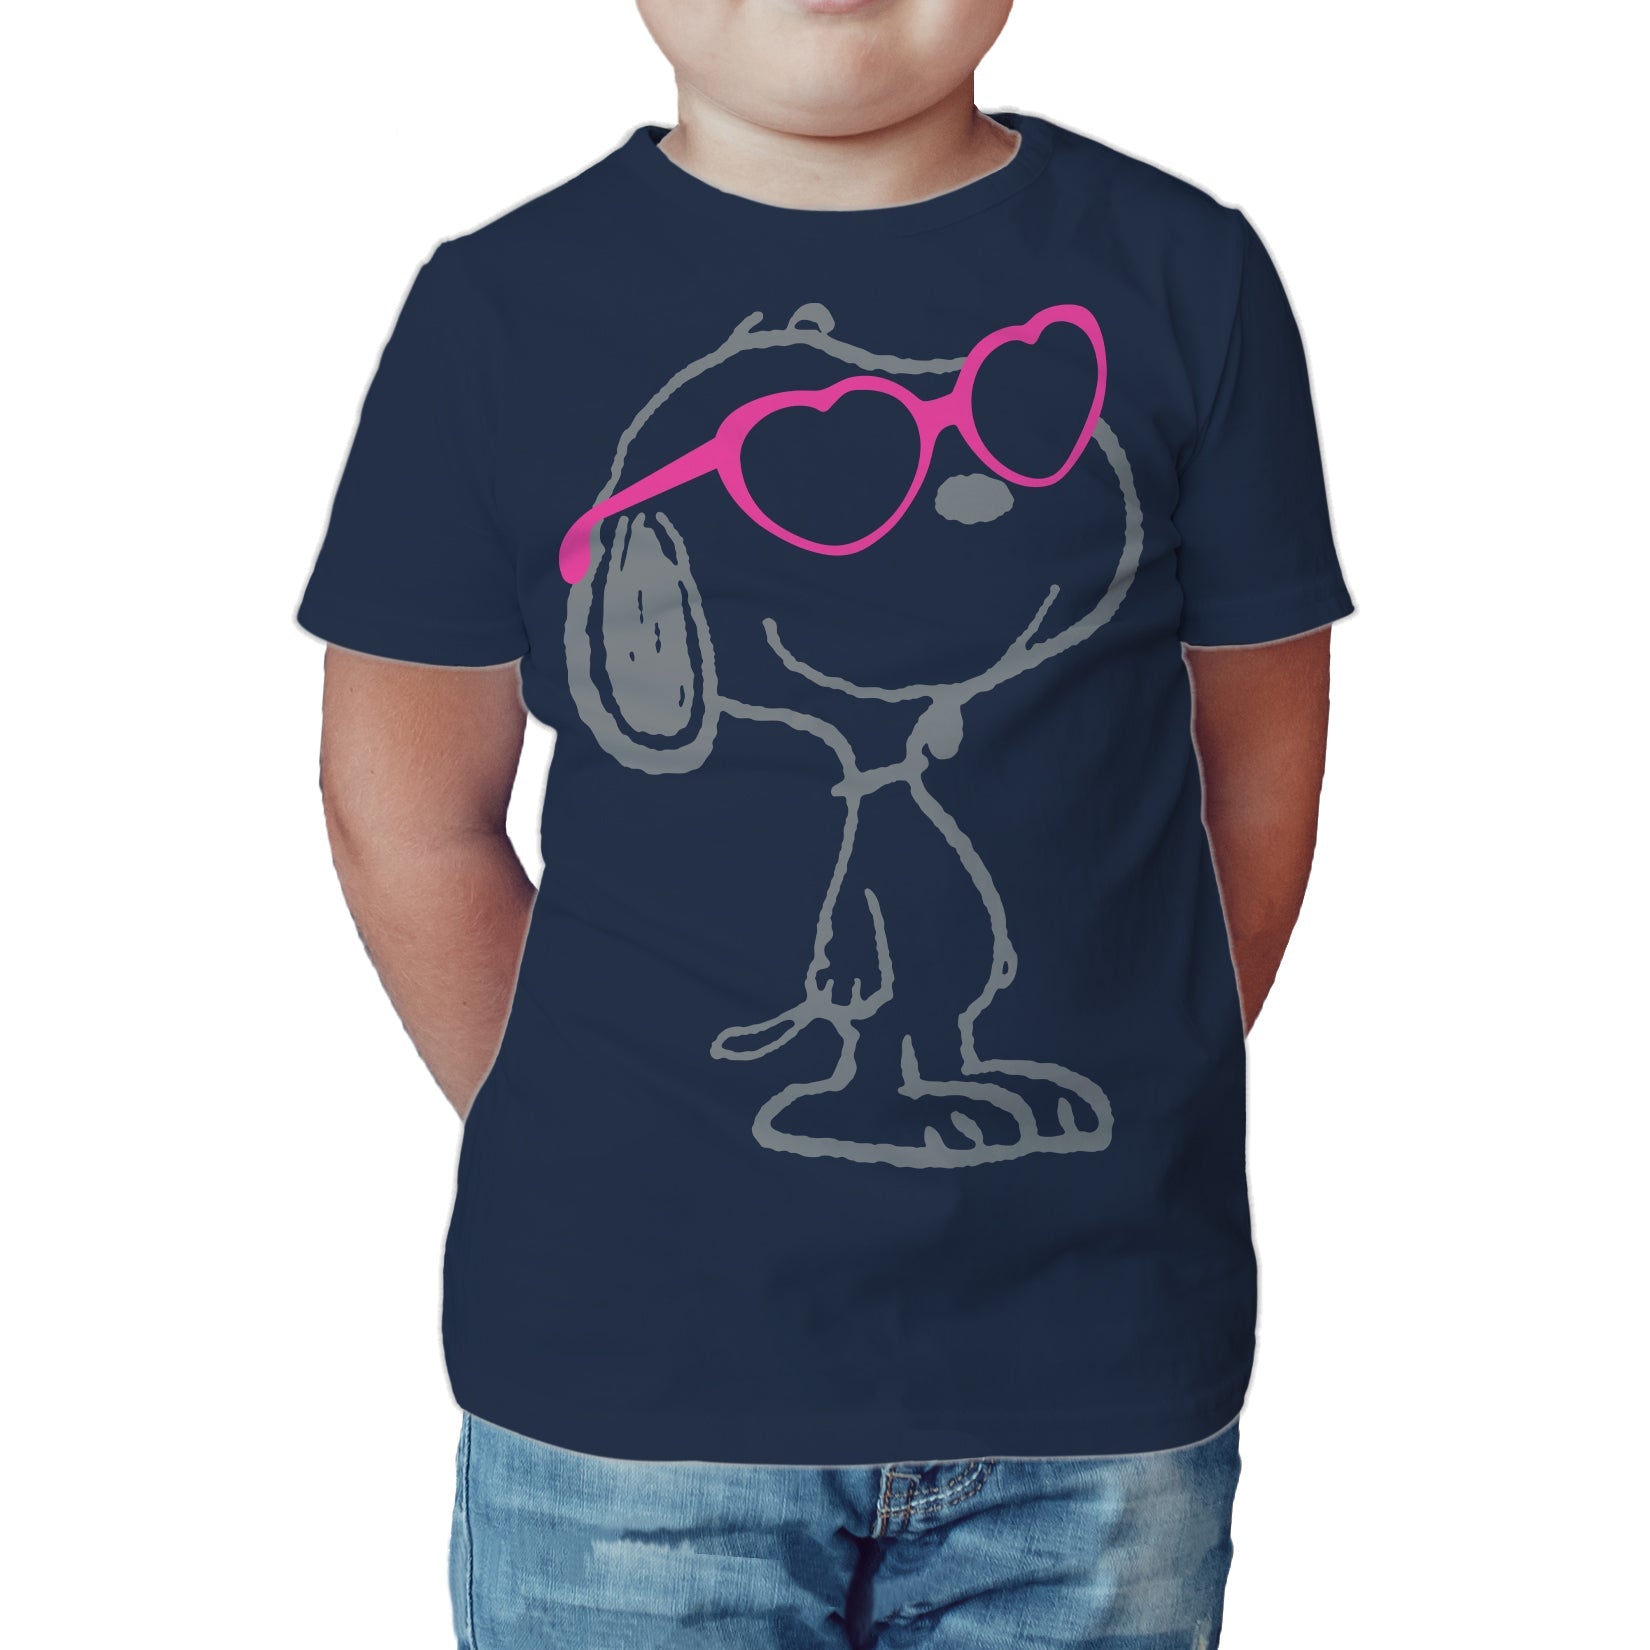 Peanuts Kids Snoopy Heart Shades Official Kid's T-Shirt